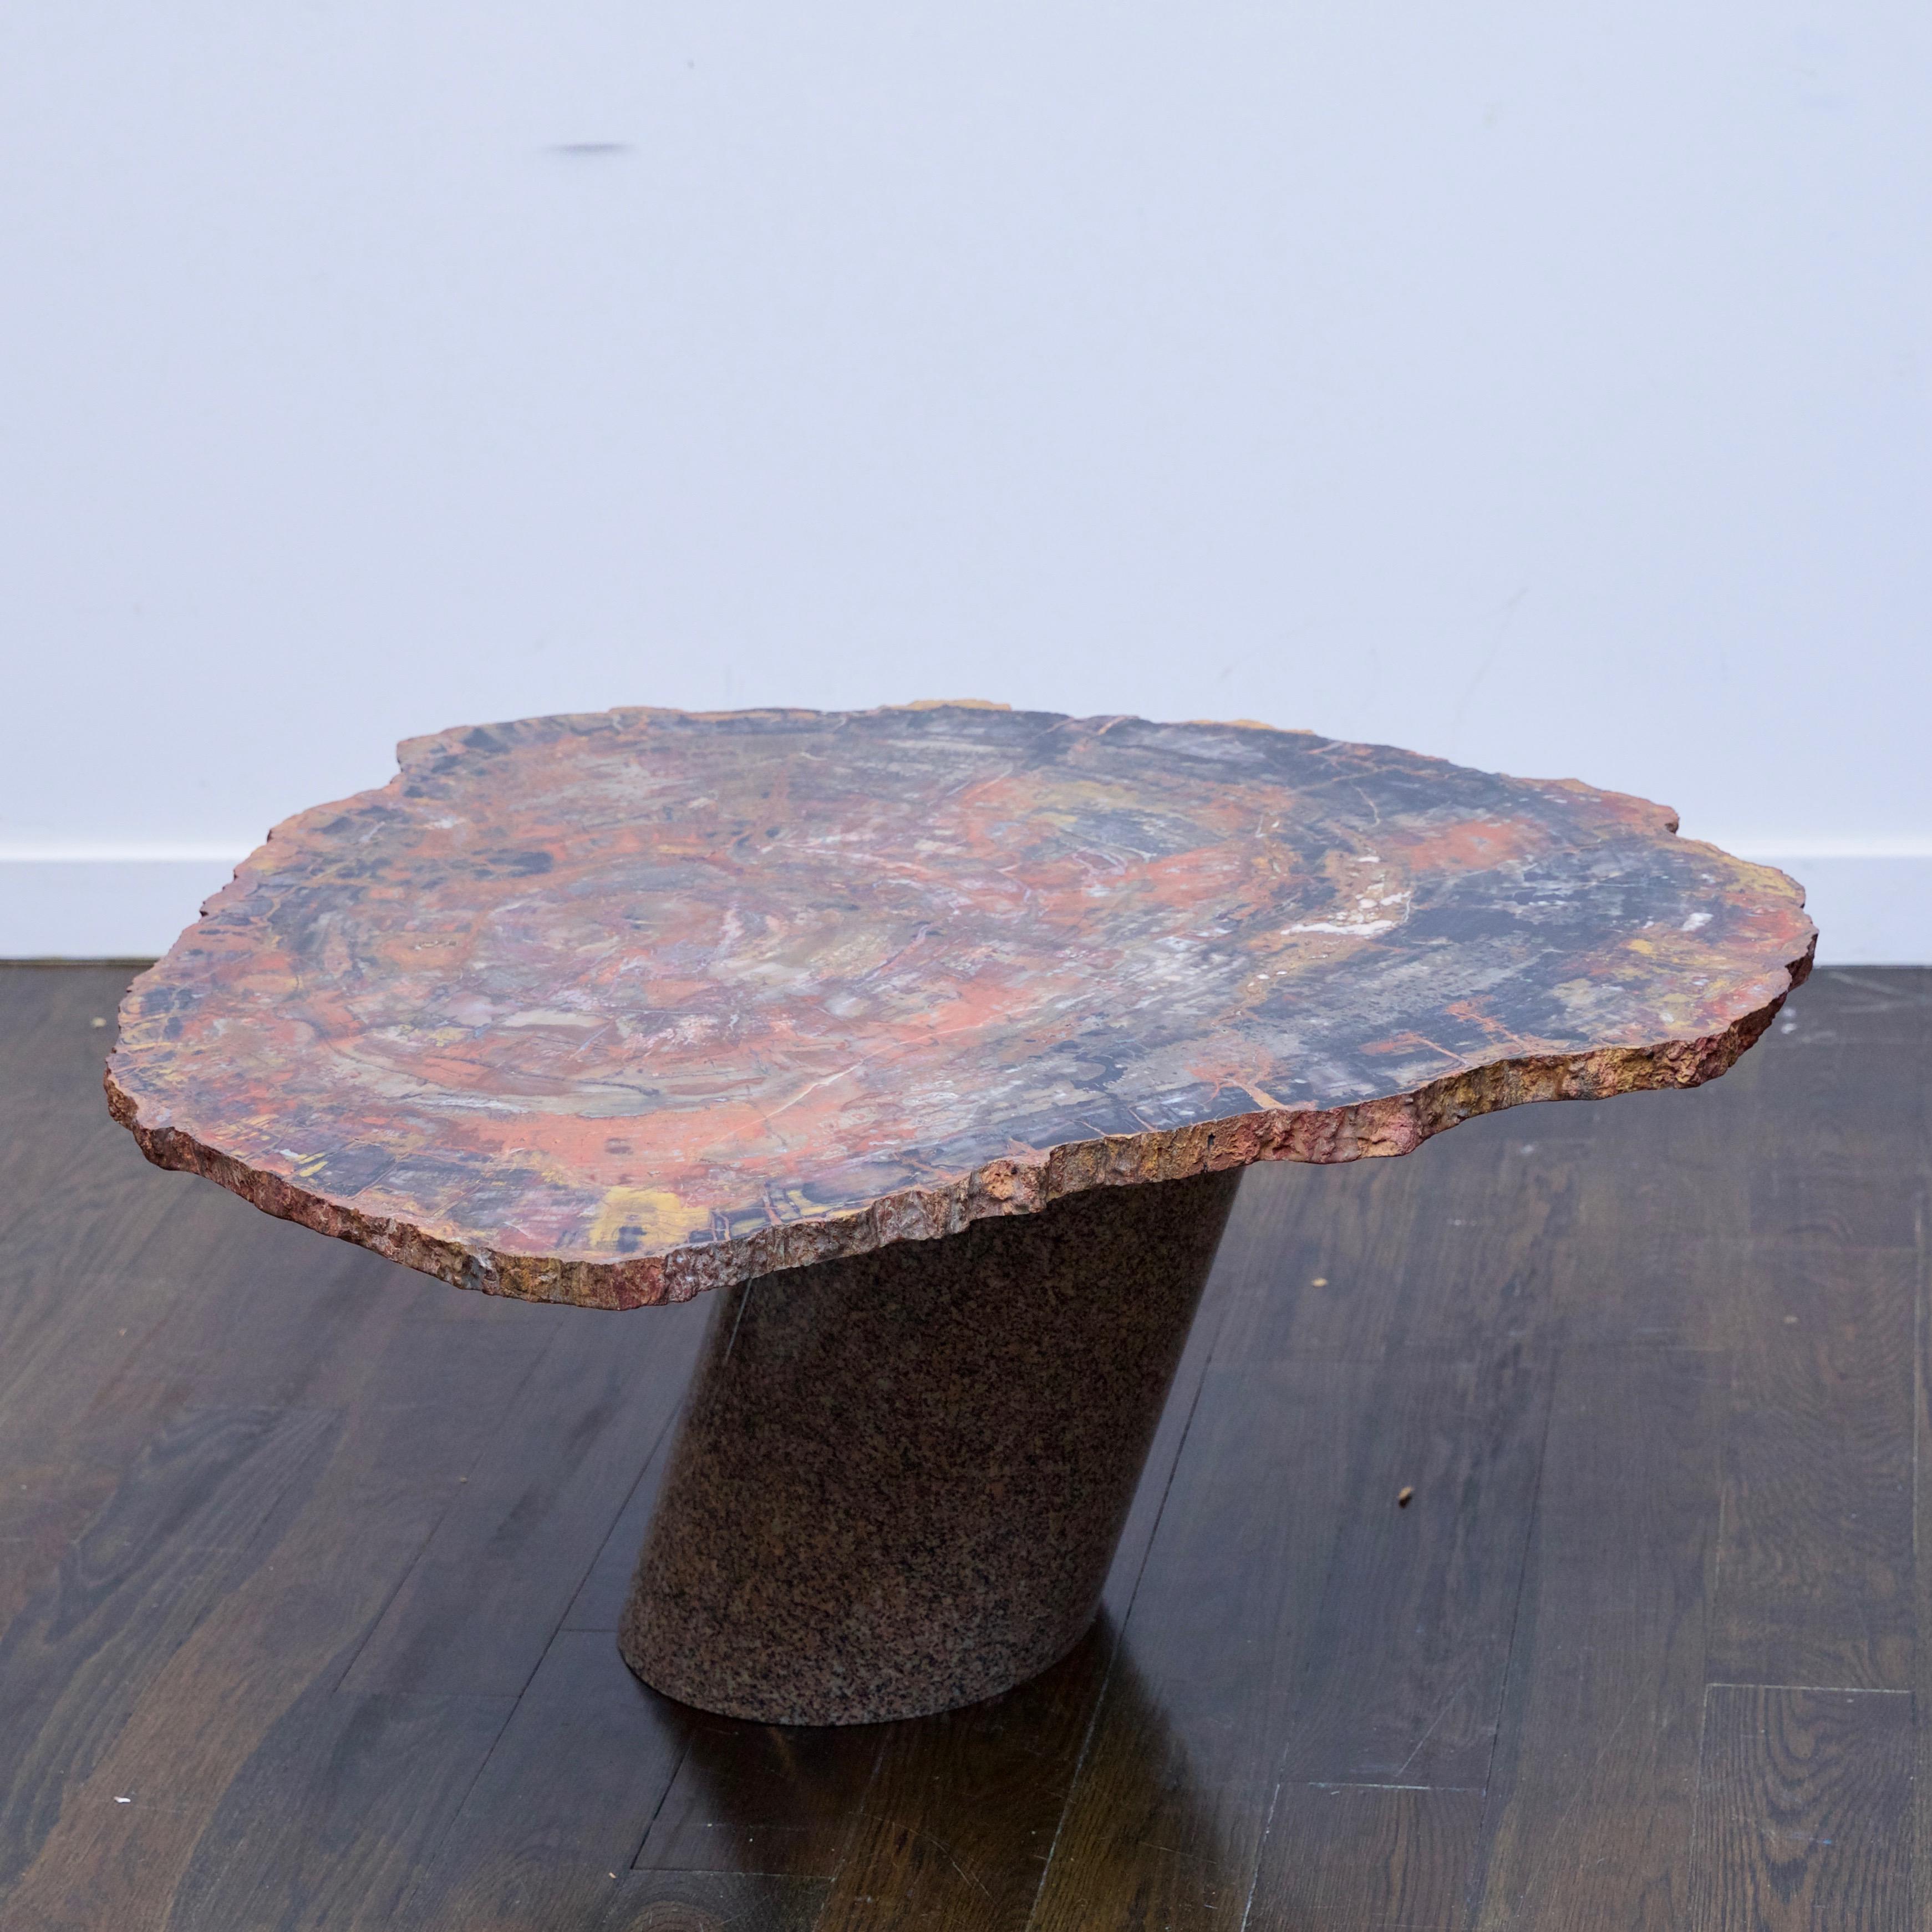 A petrified wood table top was purchased from Karl Springer for this custom piece by an unknown firm. Table is made from a cross section of petrified wood resting on a granite base.